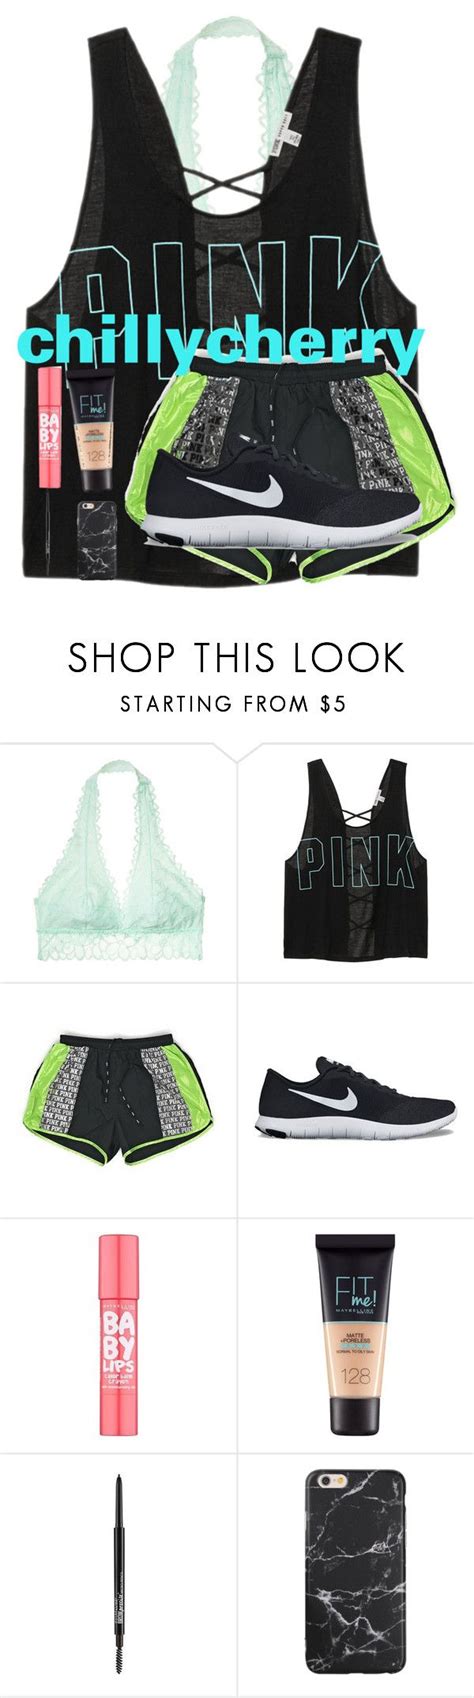 Go Follow Chillycherry By Pandadance Liked On Polyvore Featuring